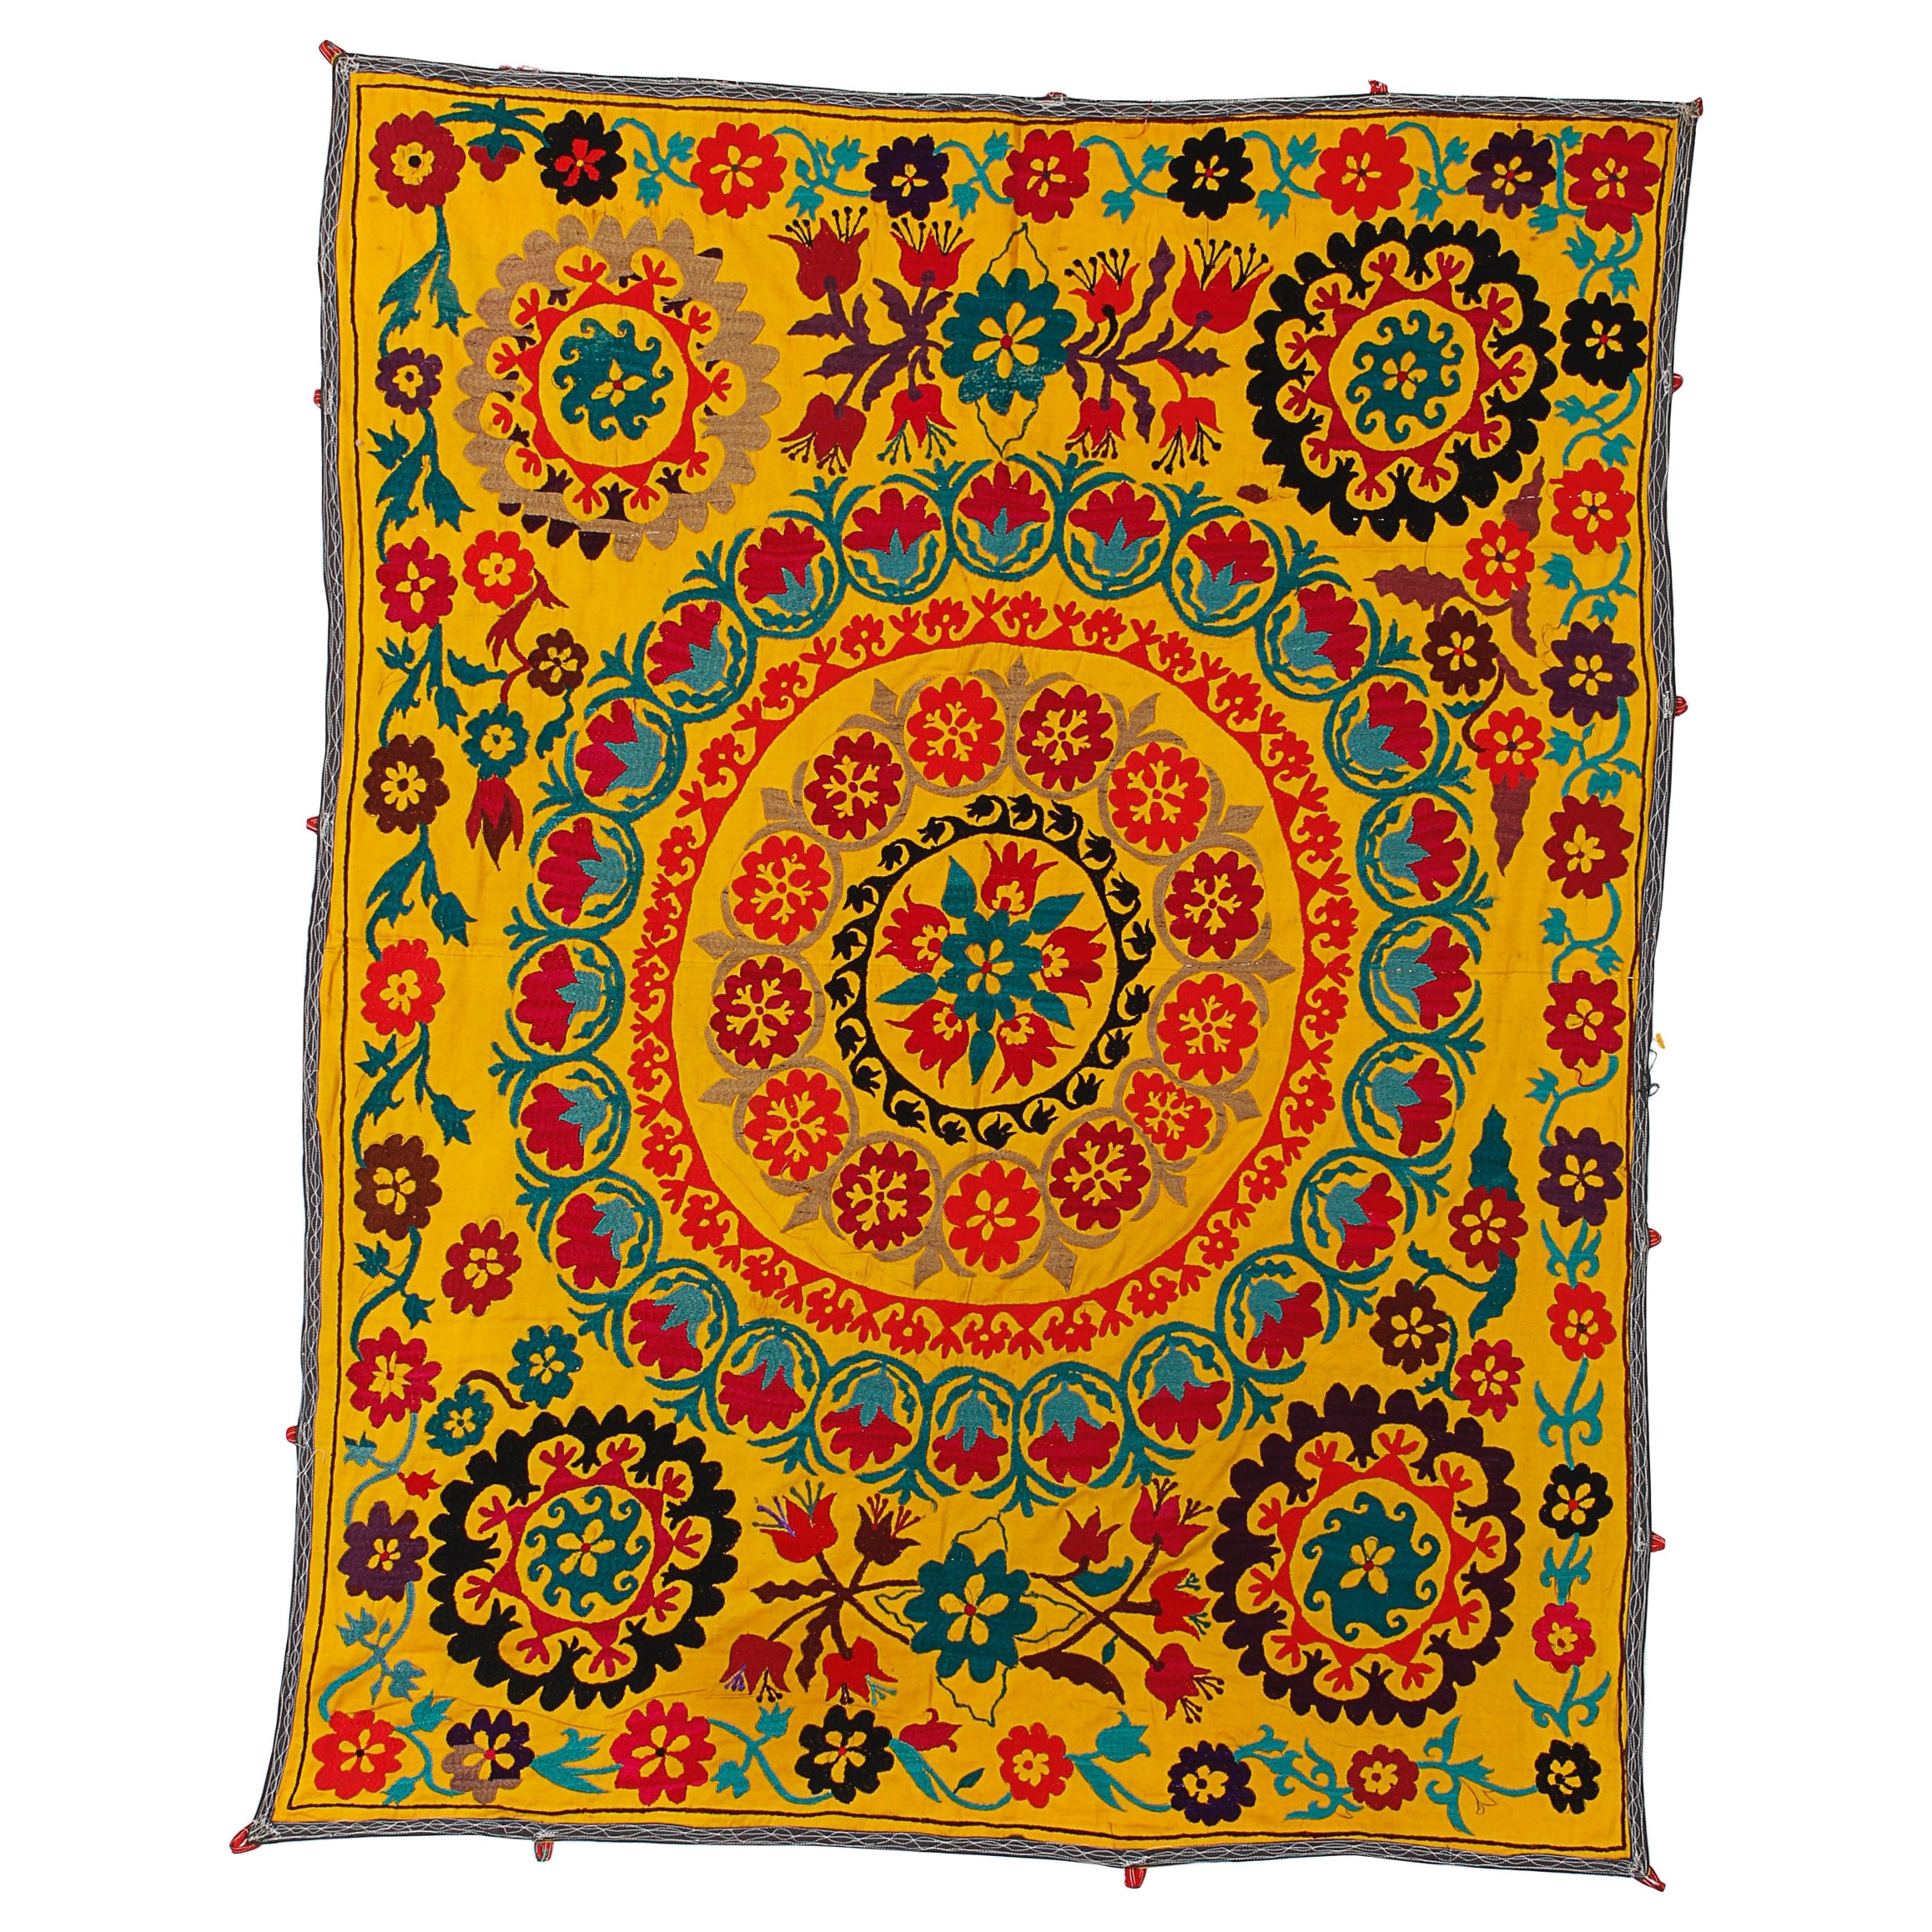 Handmade Silk Embroidery Vintage Wall Hanging. Yellow Suzani Bedspread For Sale